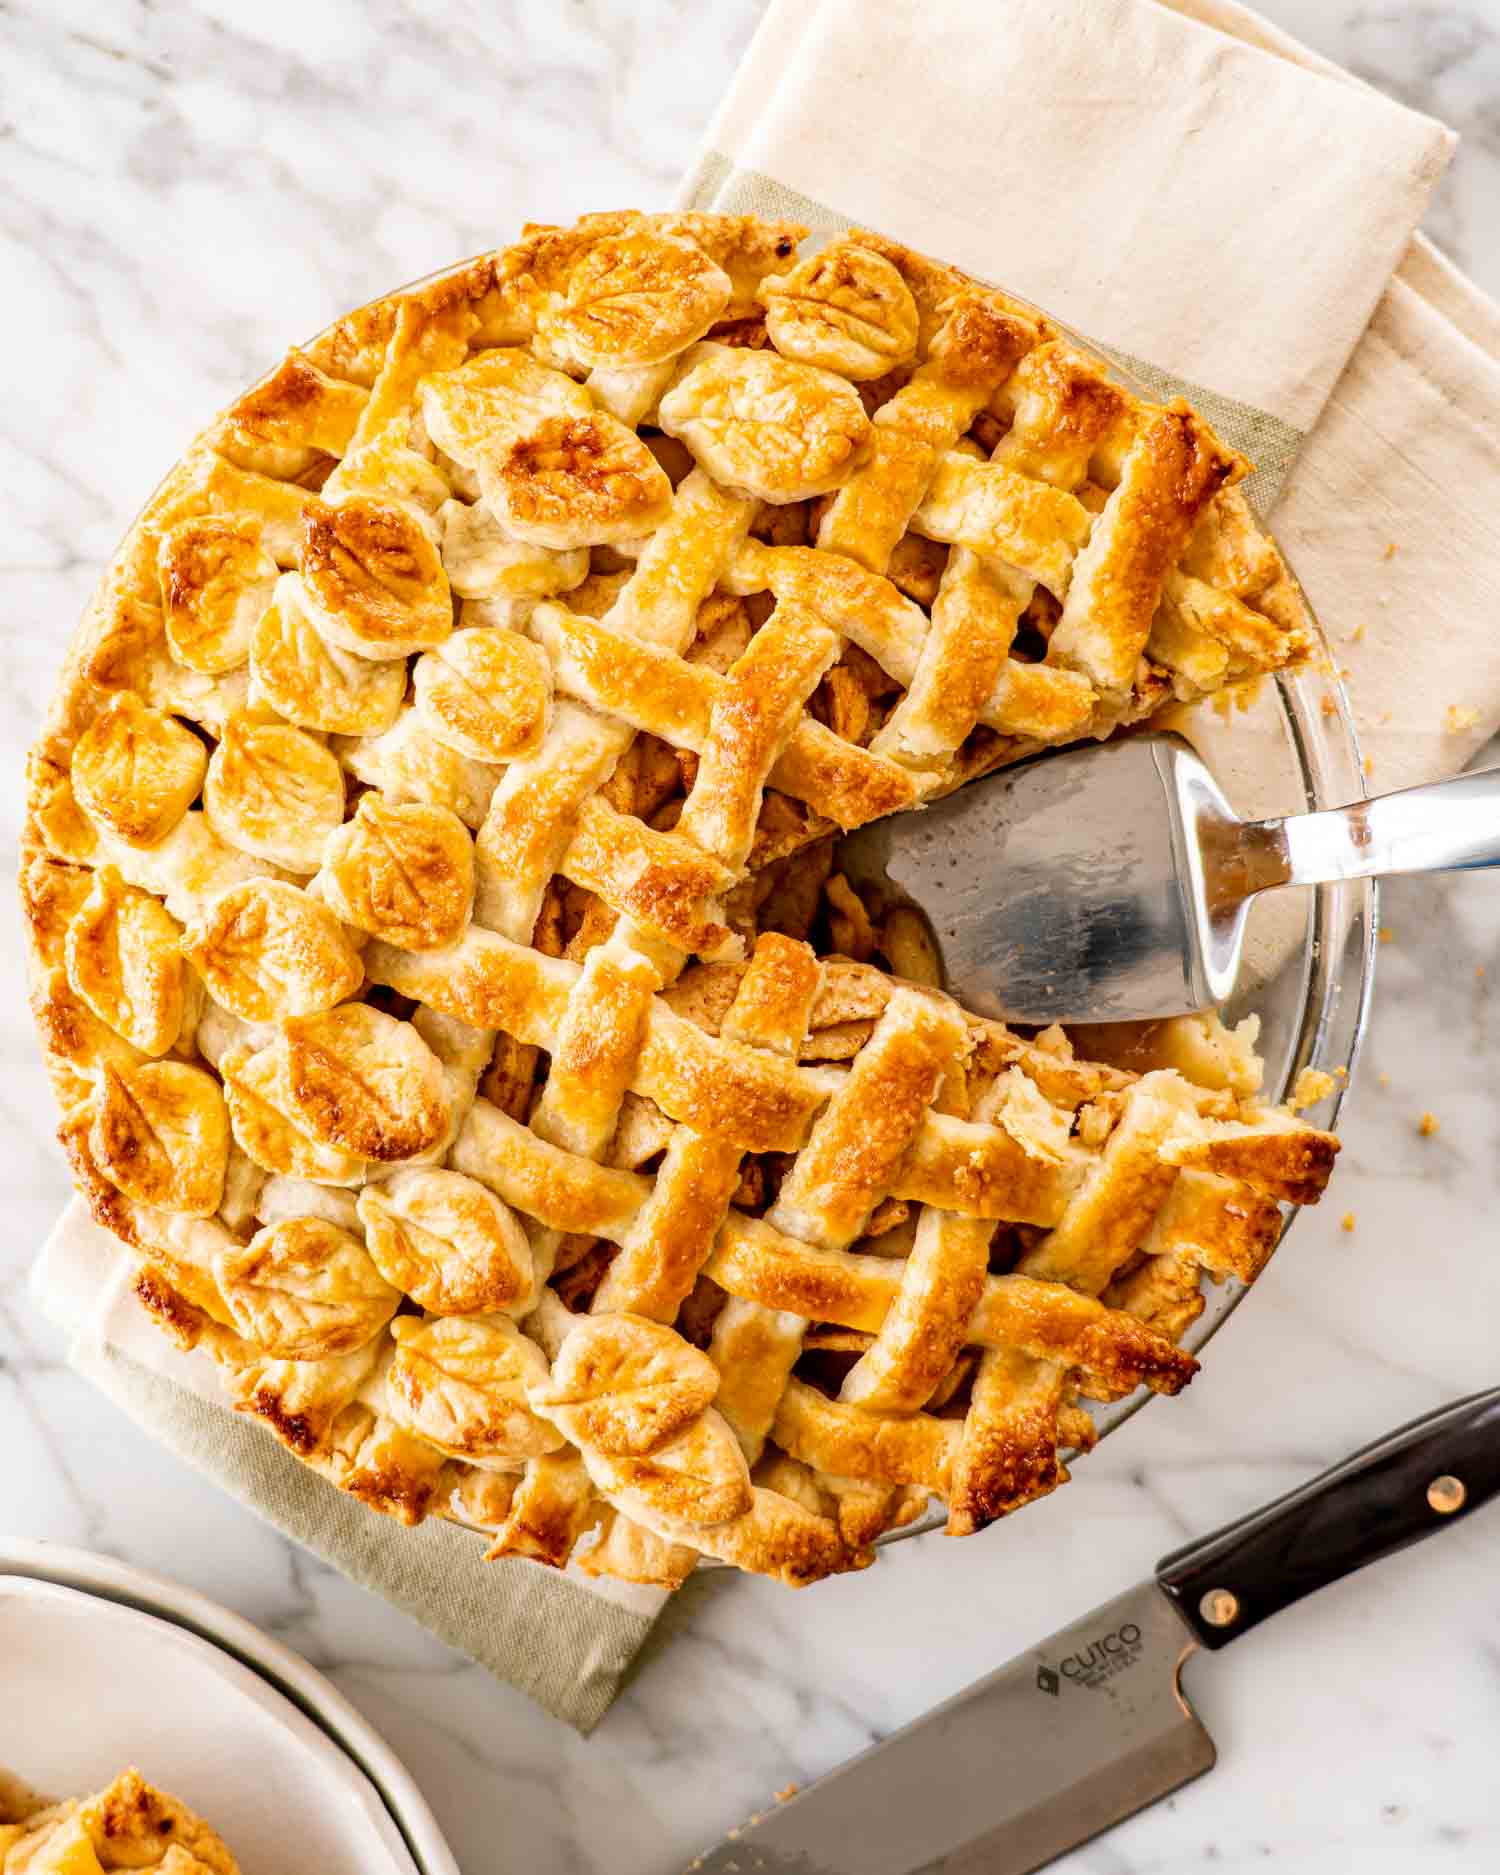 a freshly baked apple pie with lattice top crust and a slice taken out.